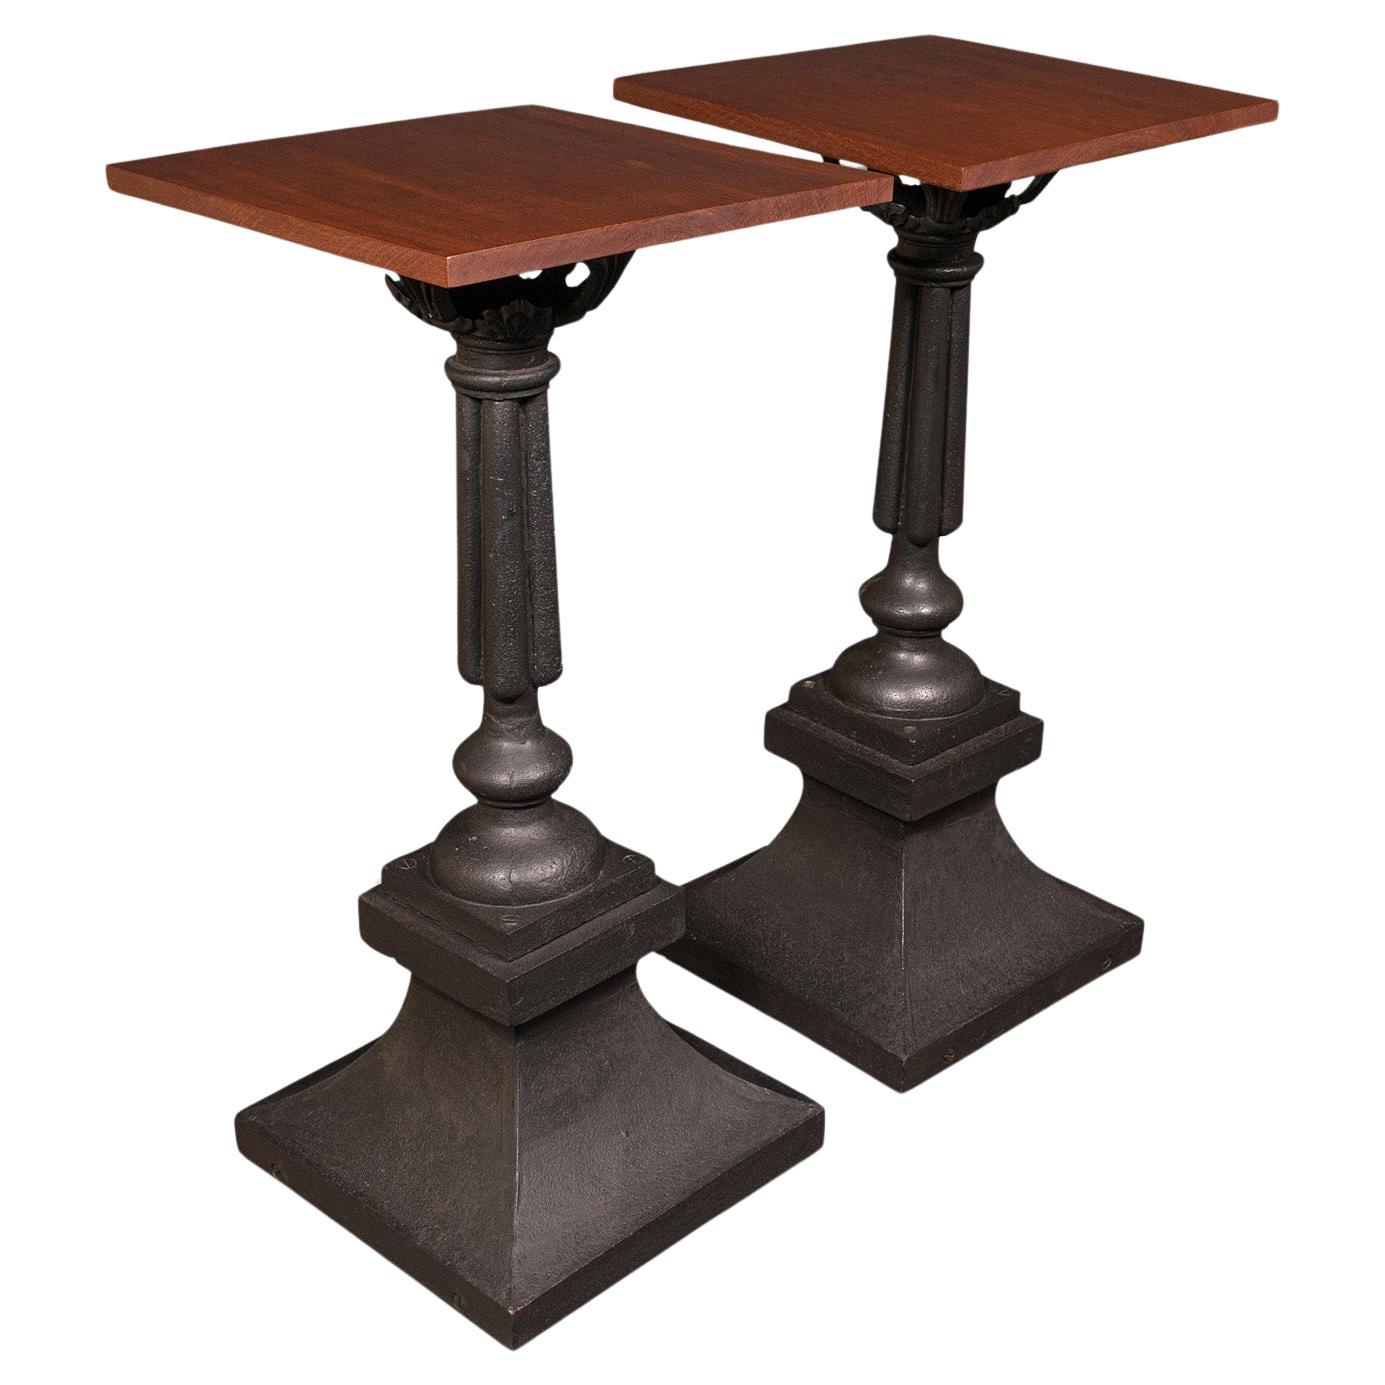 Heavy Pair Of Portico Tables, English, Iron, Statuary, Planter Stand, Victorian For Sale